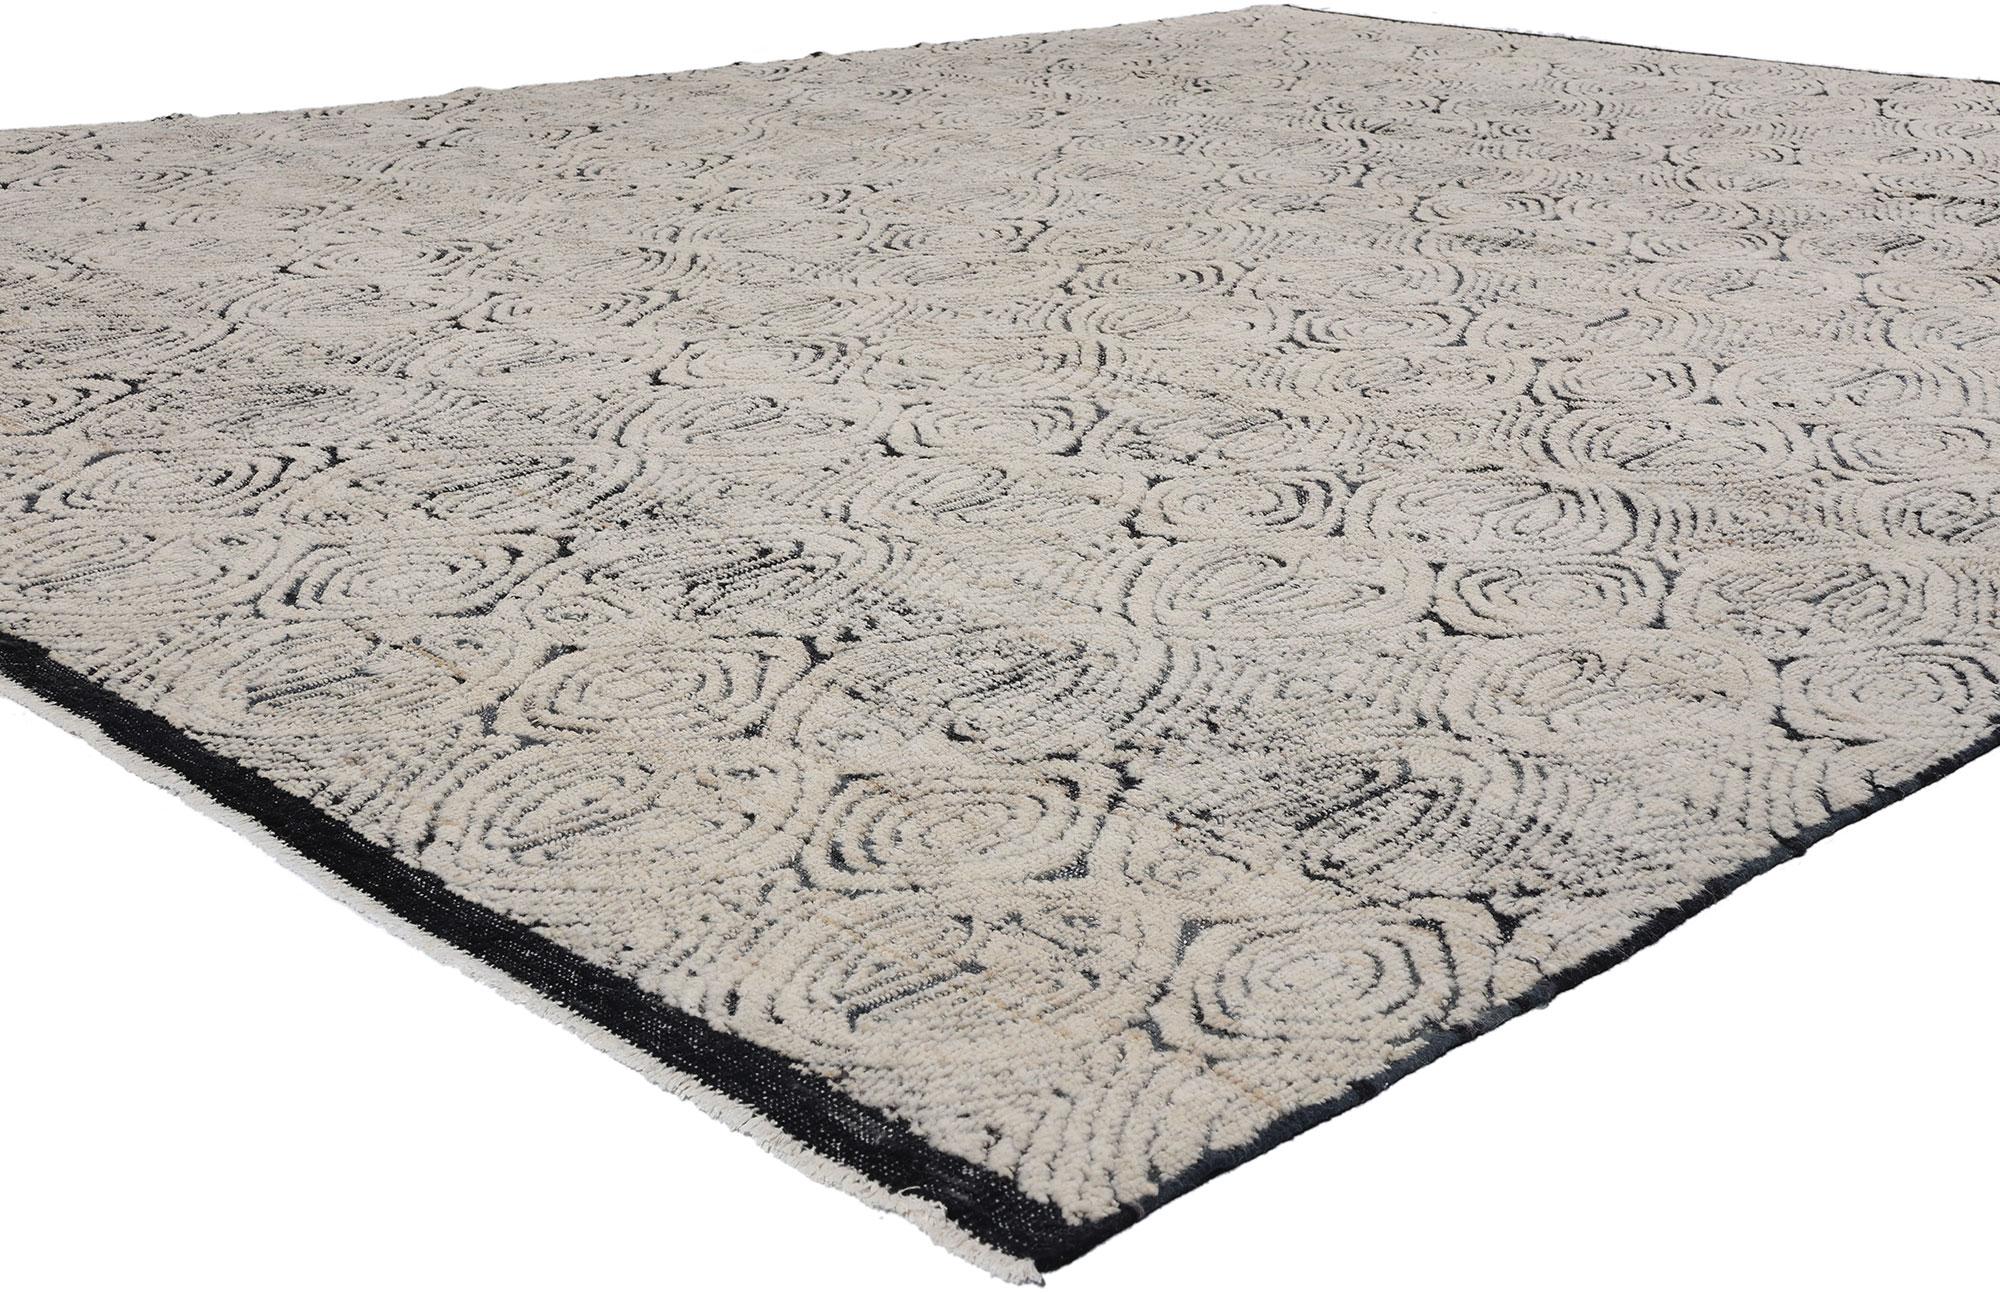 81073 Organic Modern Moroccan High-Low Rug, 08'07 x 11'08. Step into a realm of timeless elegance and harmonious balance with our hand-knotted wool Moroccan area rug, a masterful fusion of Wabi-Sabi design and Biophilic Japandi aesthetics.